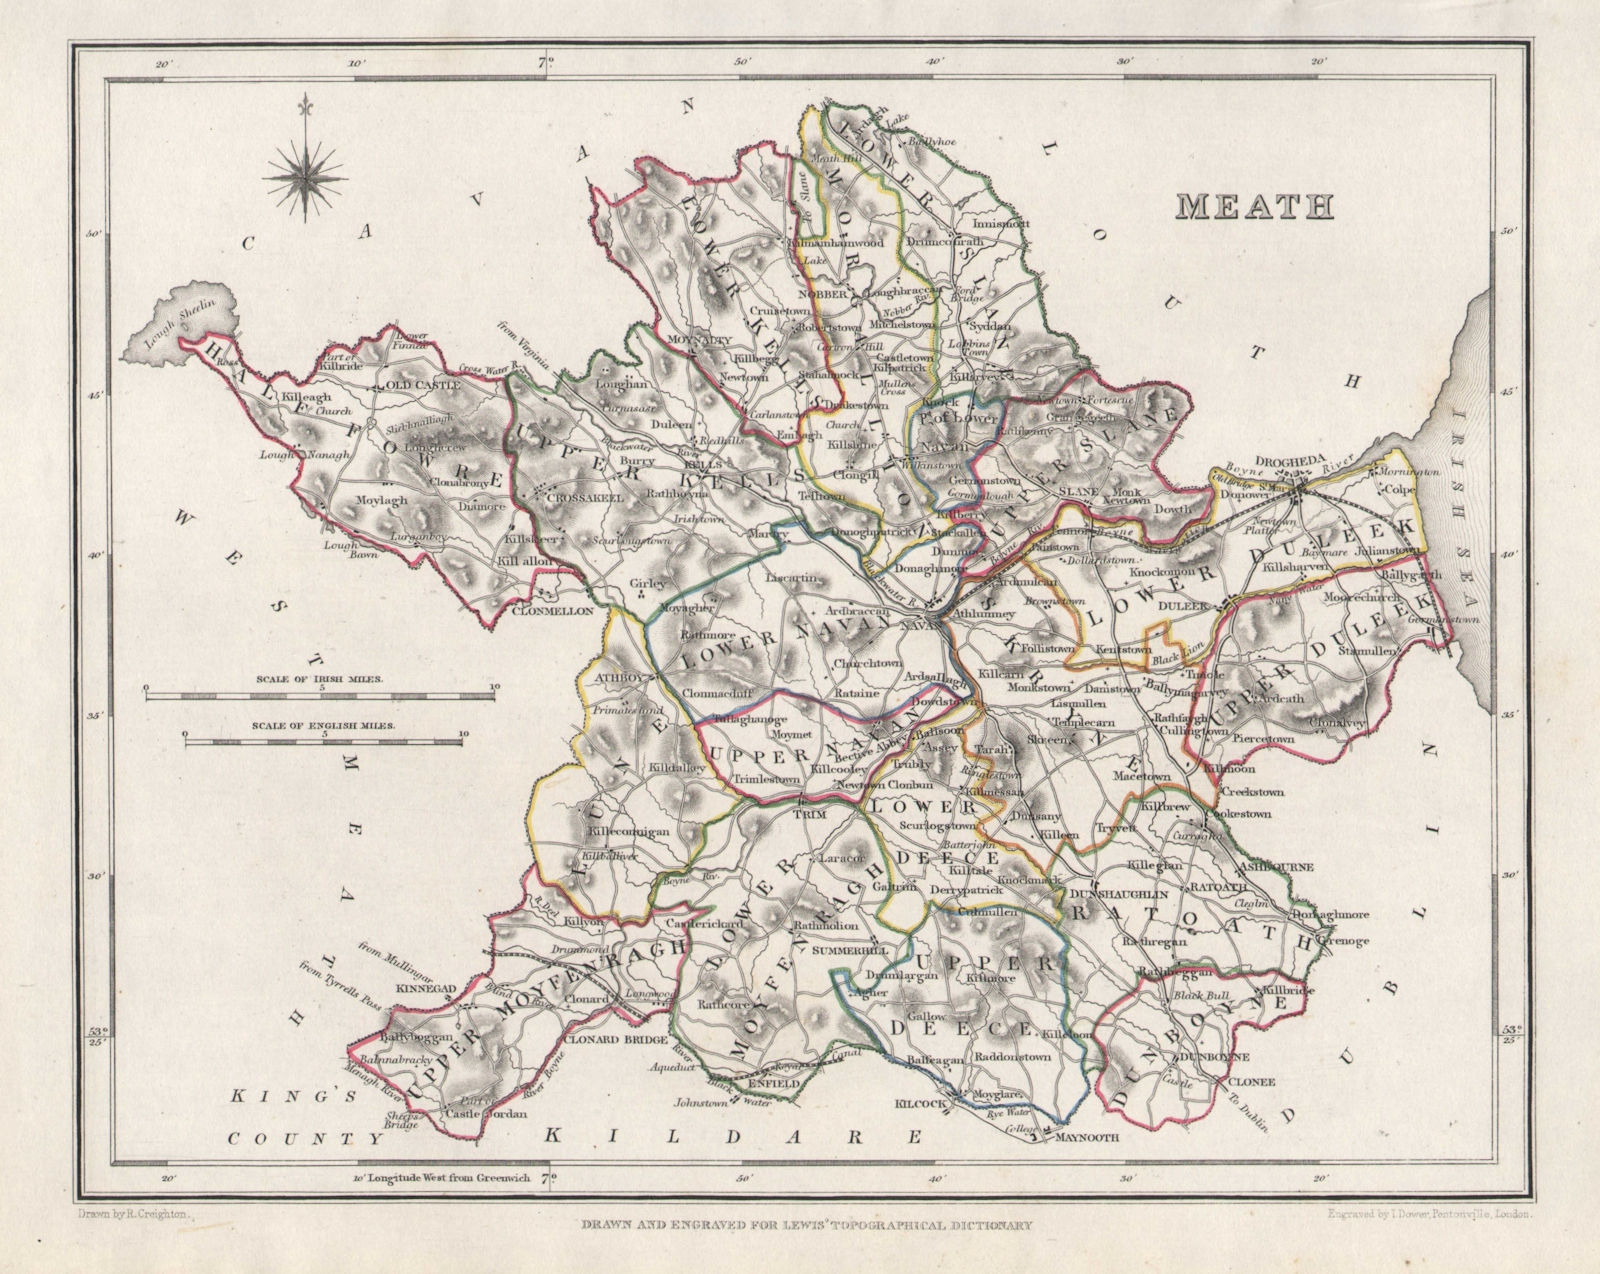 Associate Product COUNTY MEATH antique map for LEWIS by CREIGHTON & DOWER. Ireland 1846 old